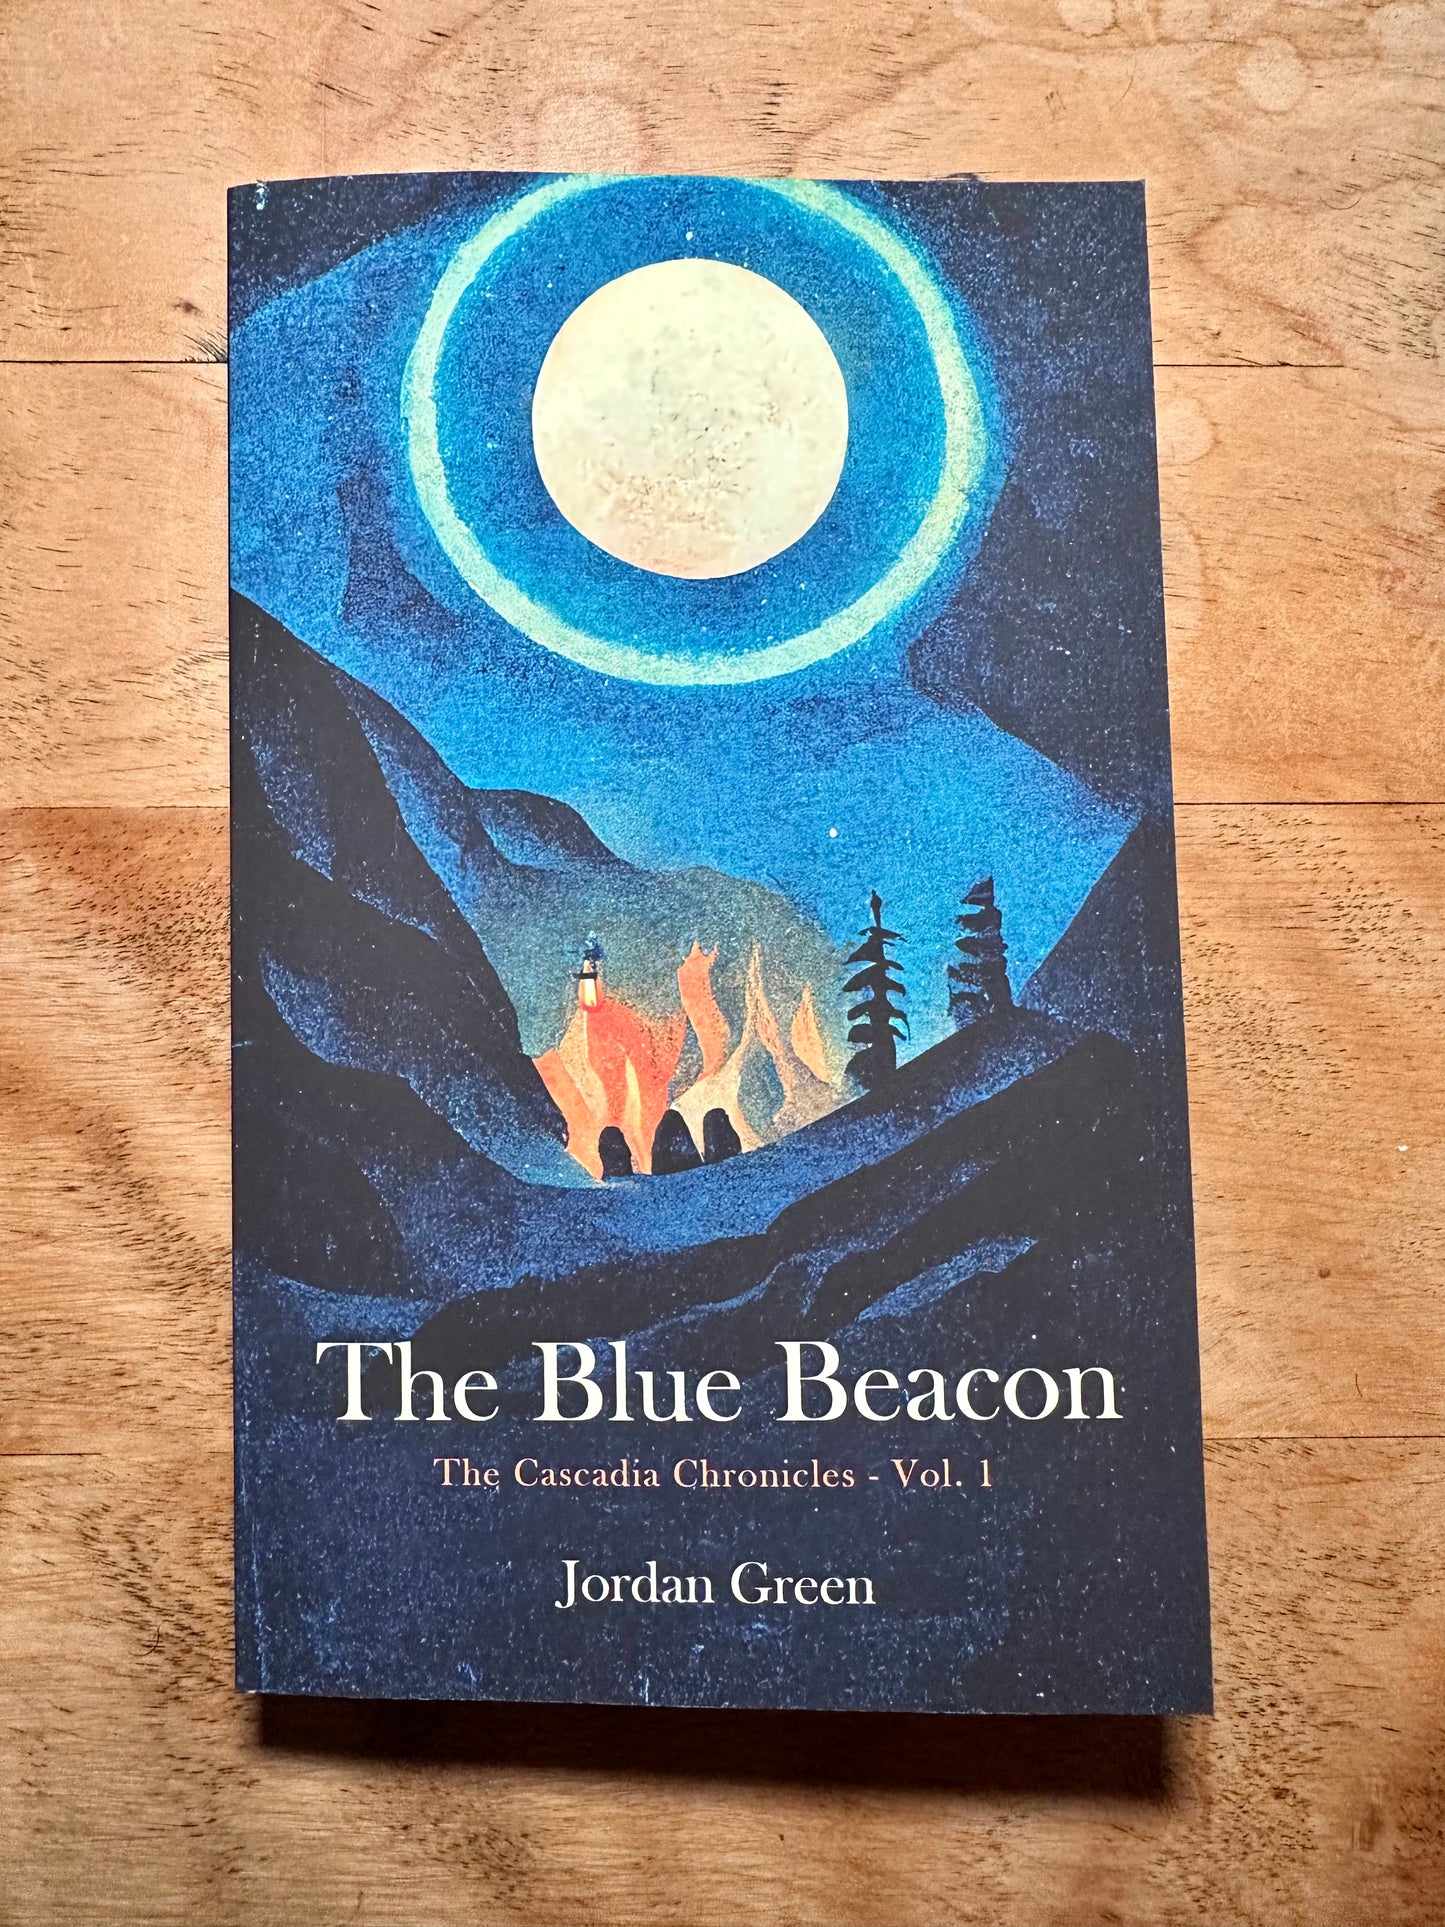 A top down perspective of the front cover of the blue beacon on a wooden desk